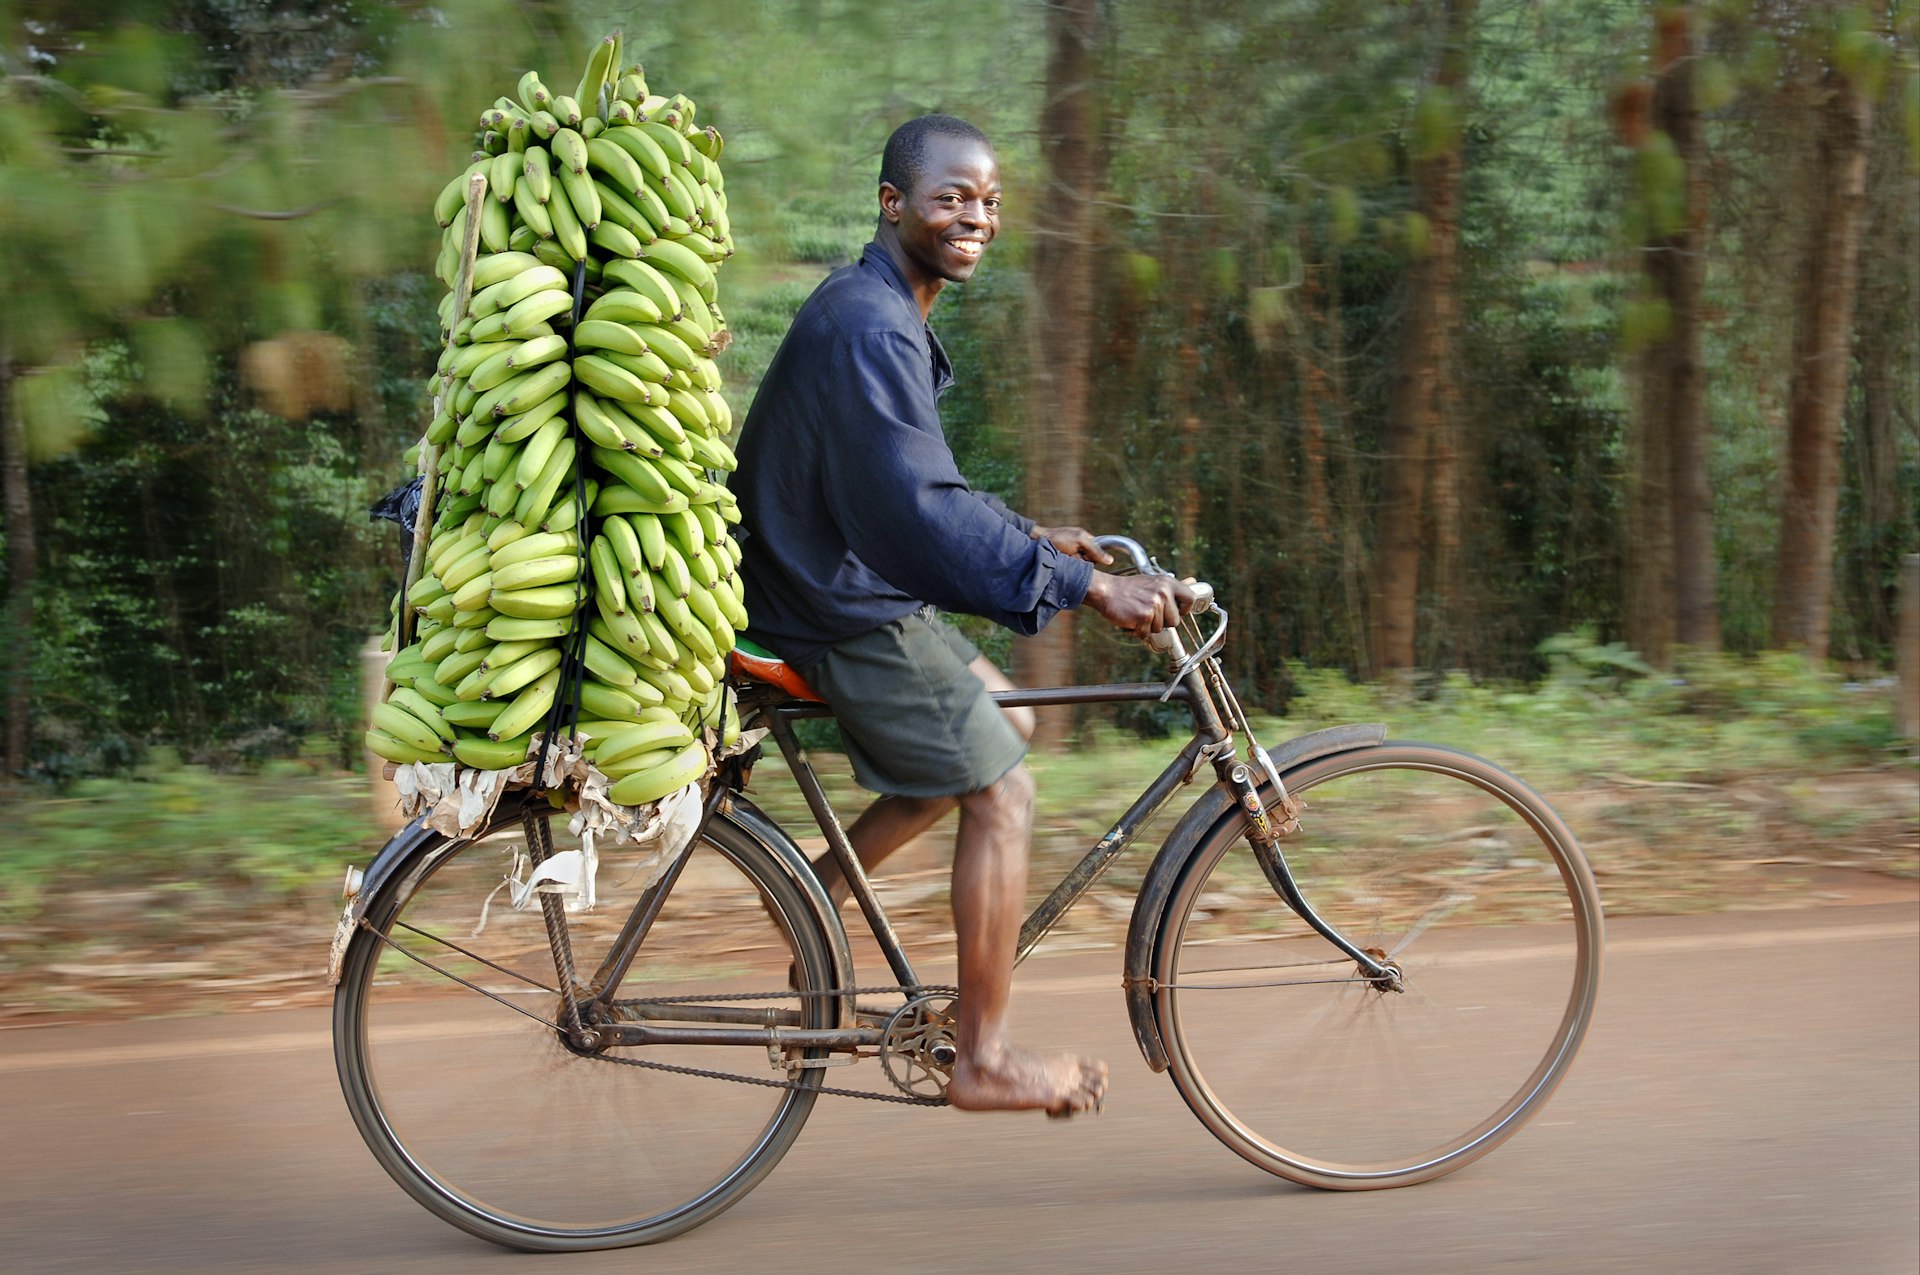 A man bicycling with bananas in Malawi